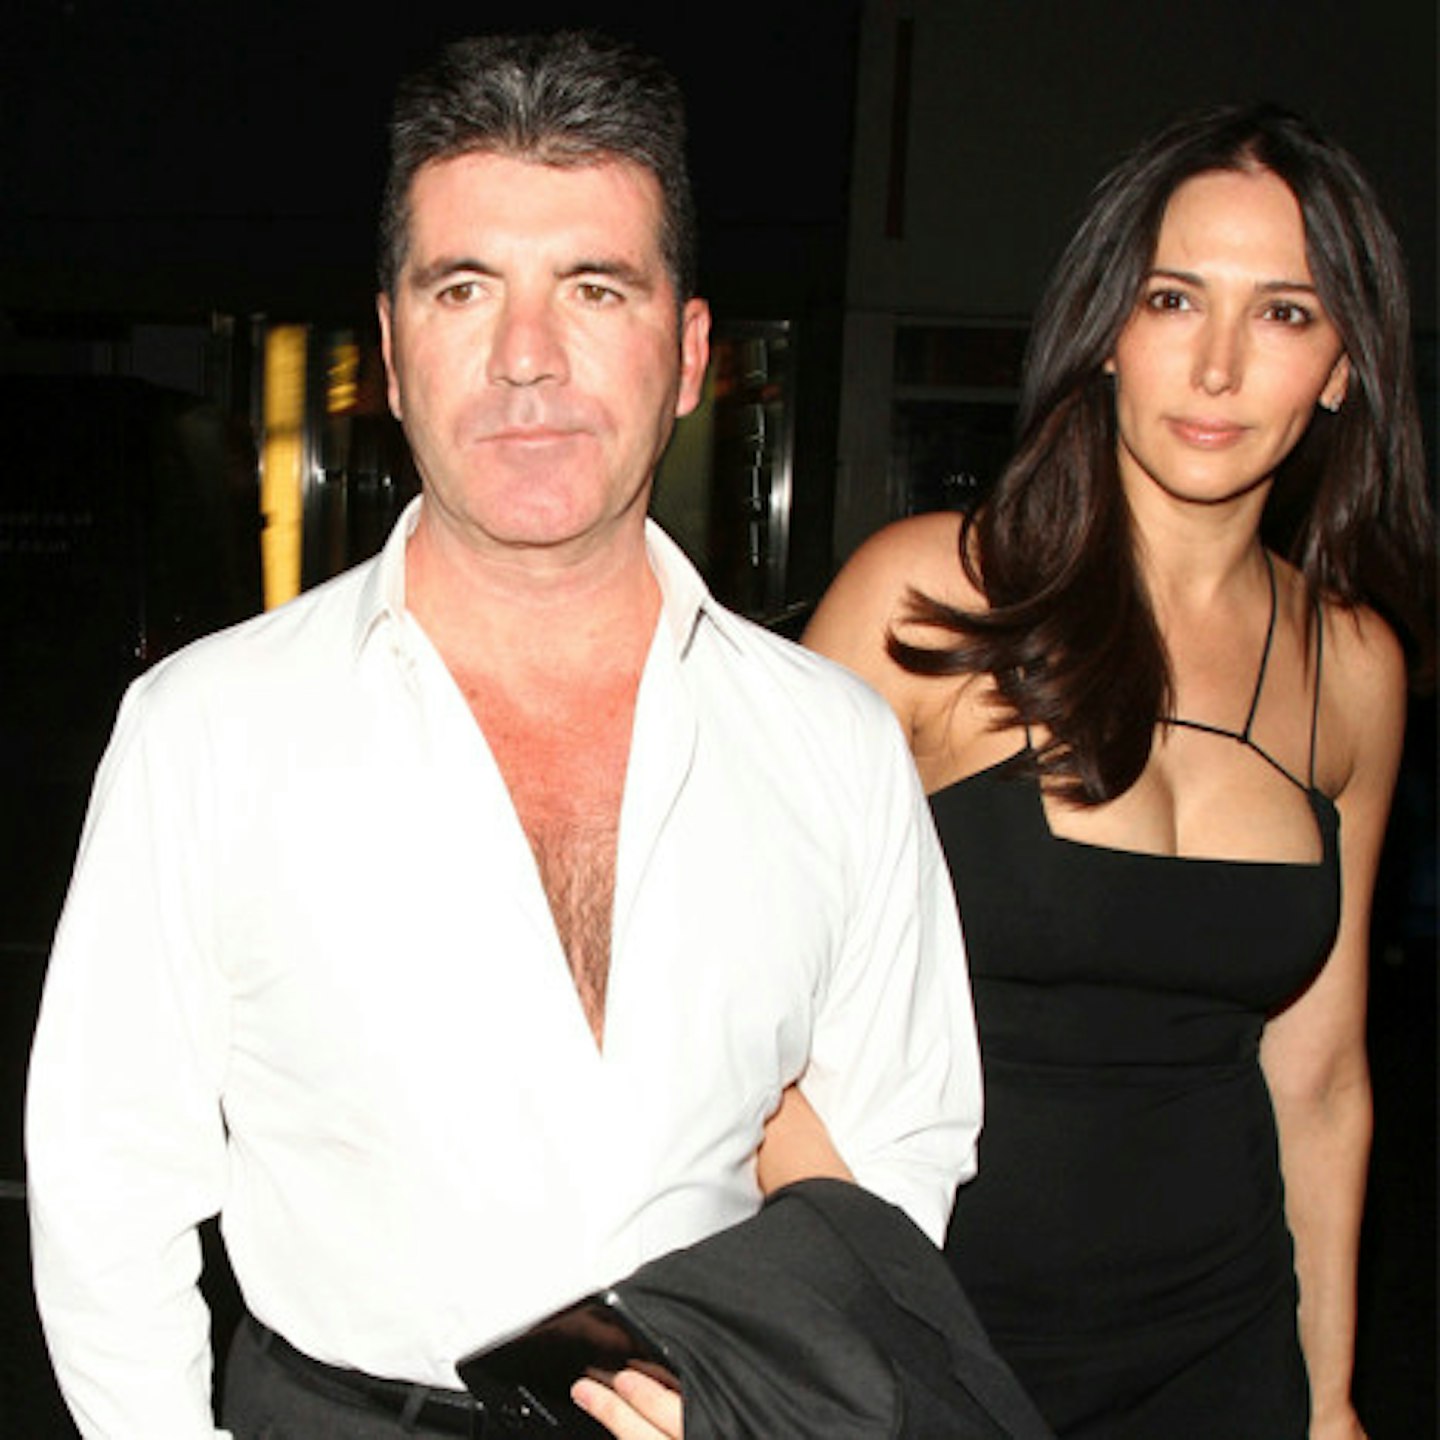 Simon revealed Cheryl does not want Louis back